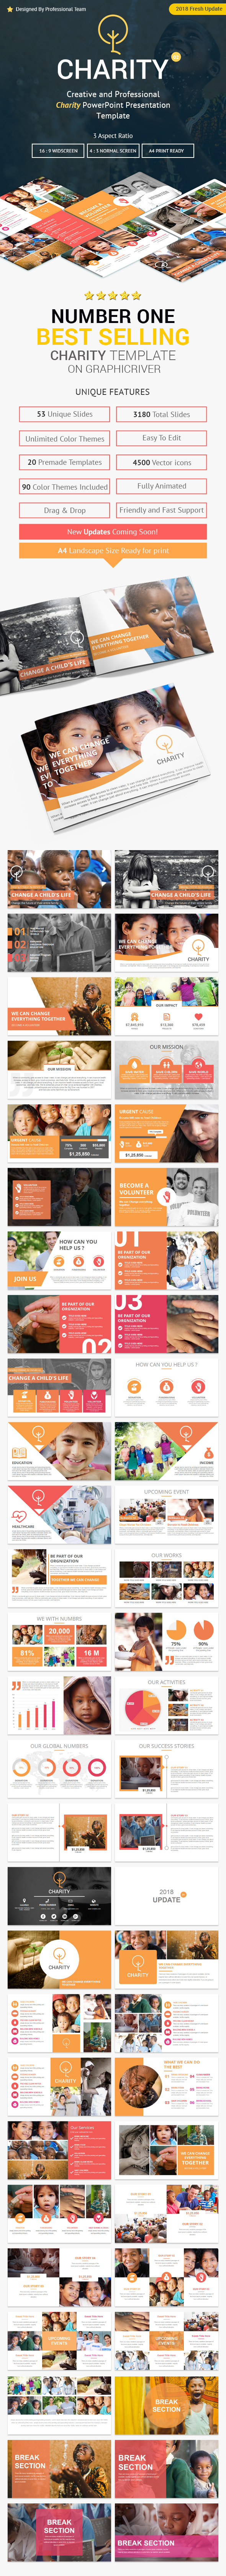 Charity Creative PowerPoint Presentation Template